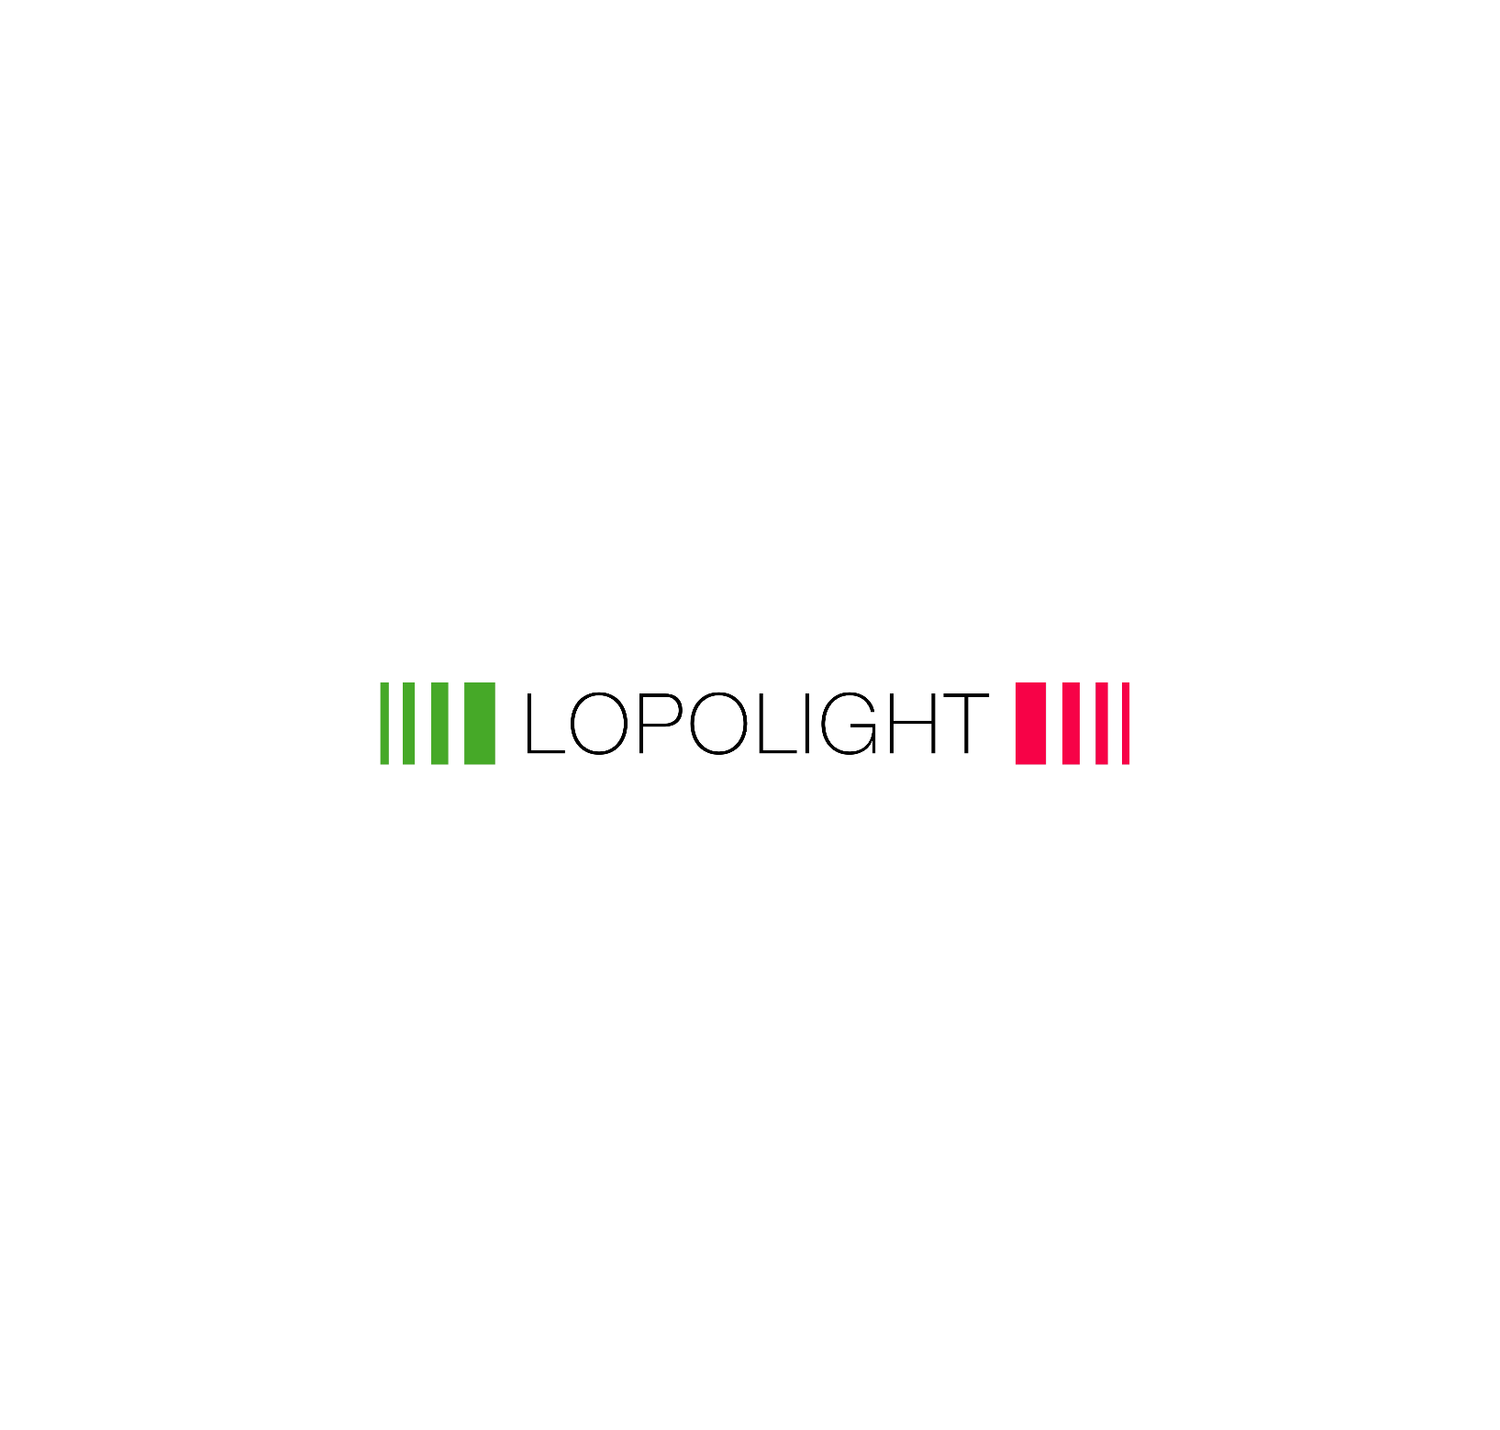 Copoint Supplier Distributor of Lopolight Navigation Lighting